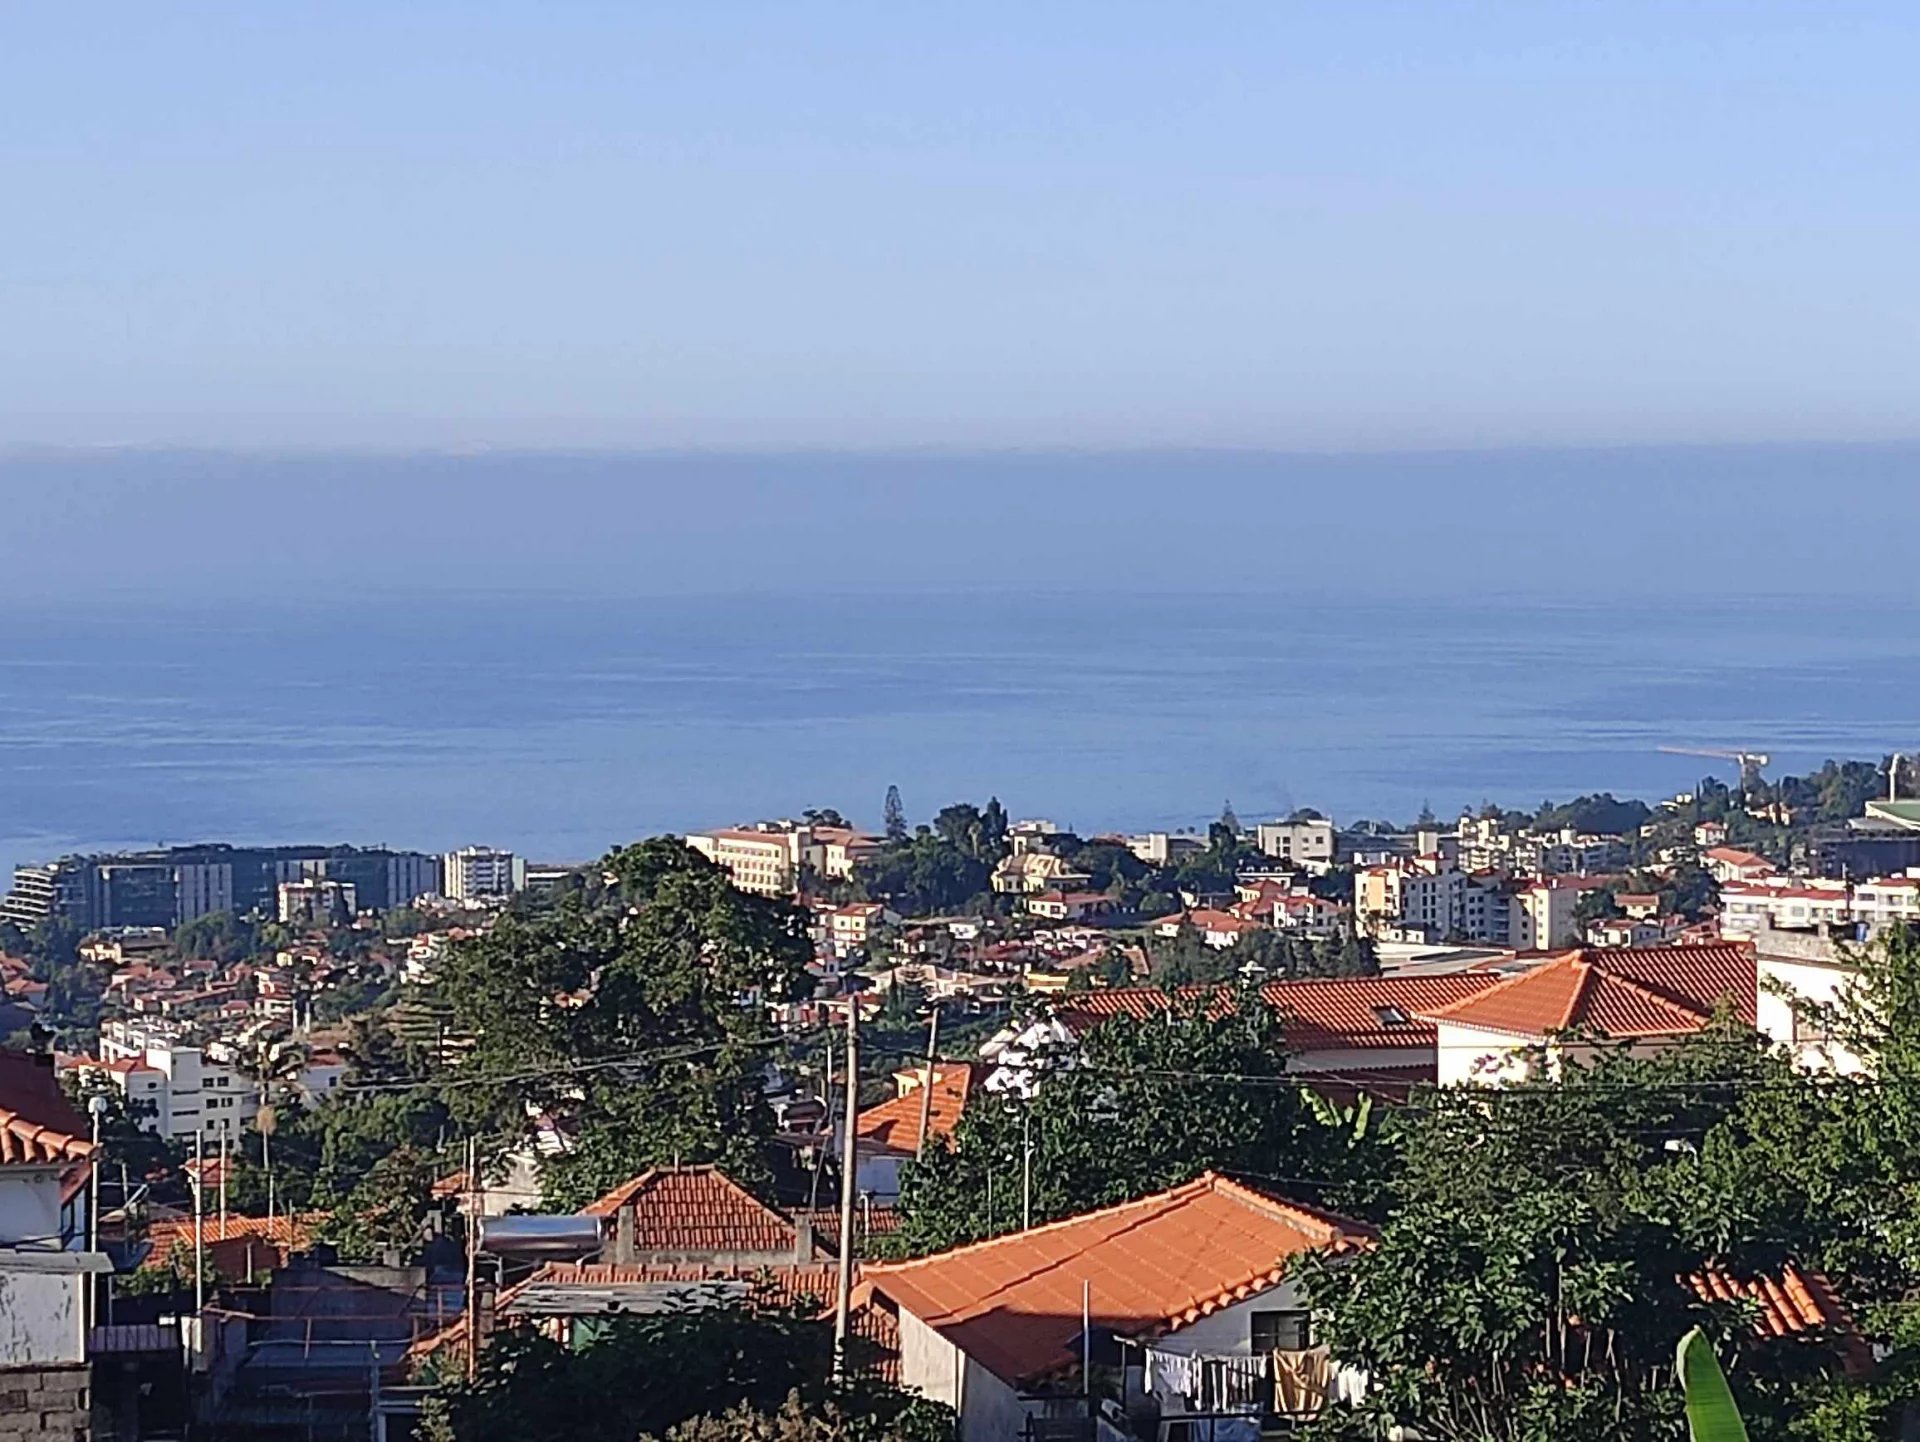 Building land with ruin and view of the ocean and Funchal